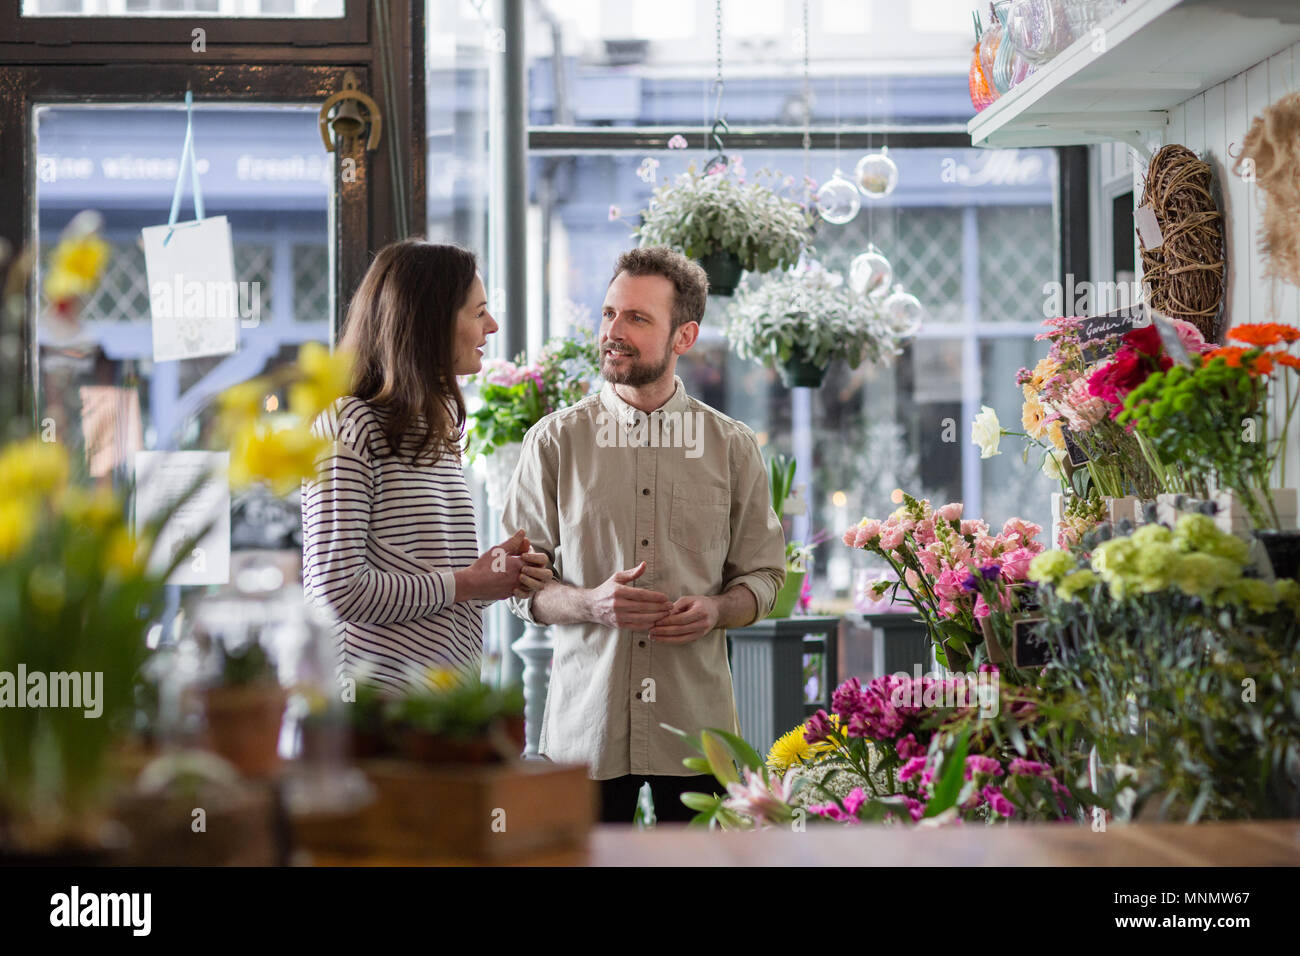 Florist serving customer in a store Stock Photo